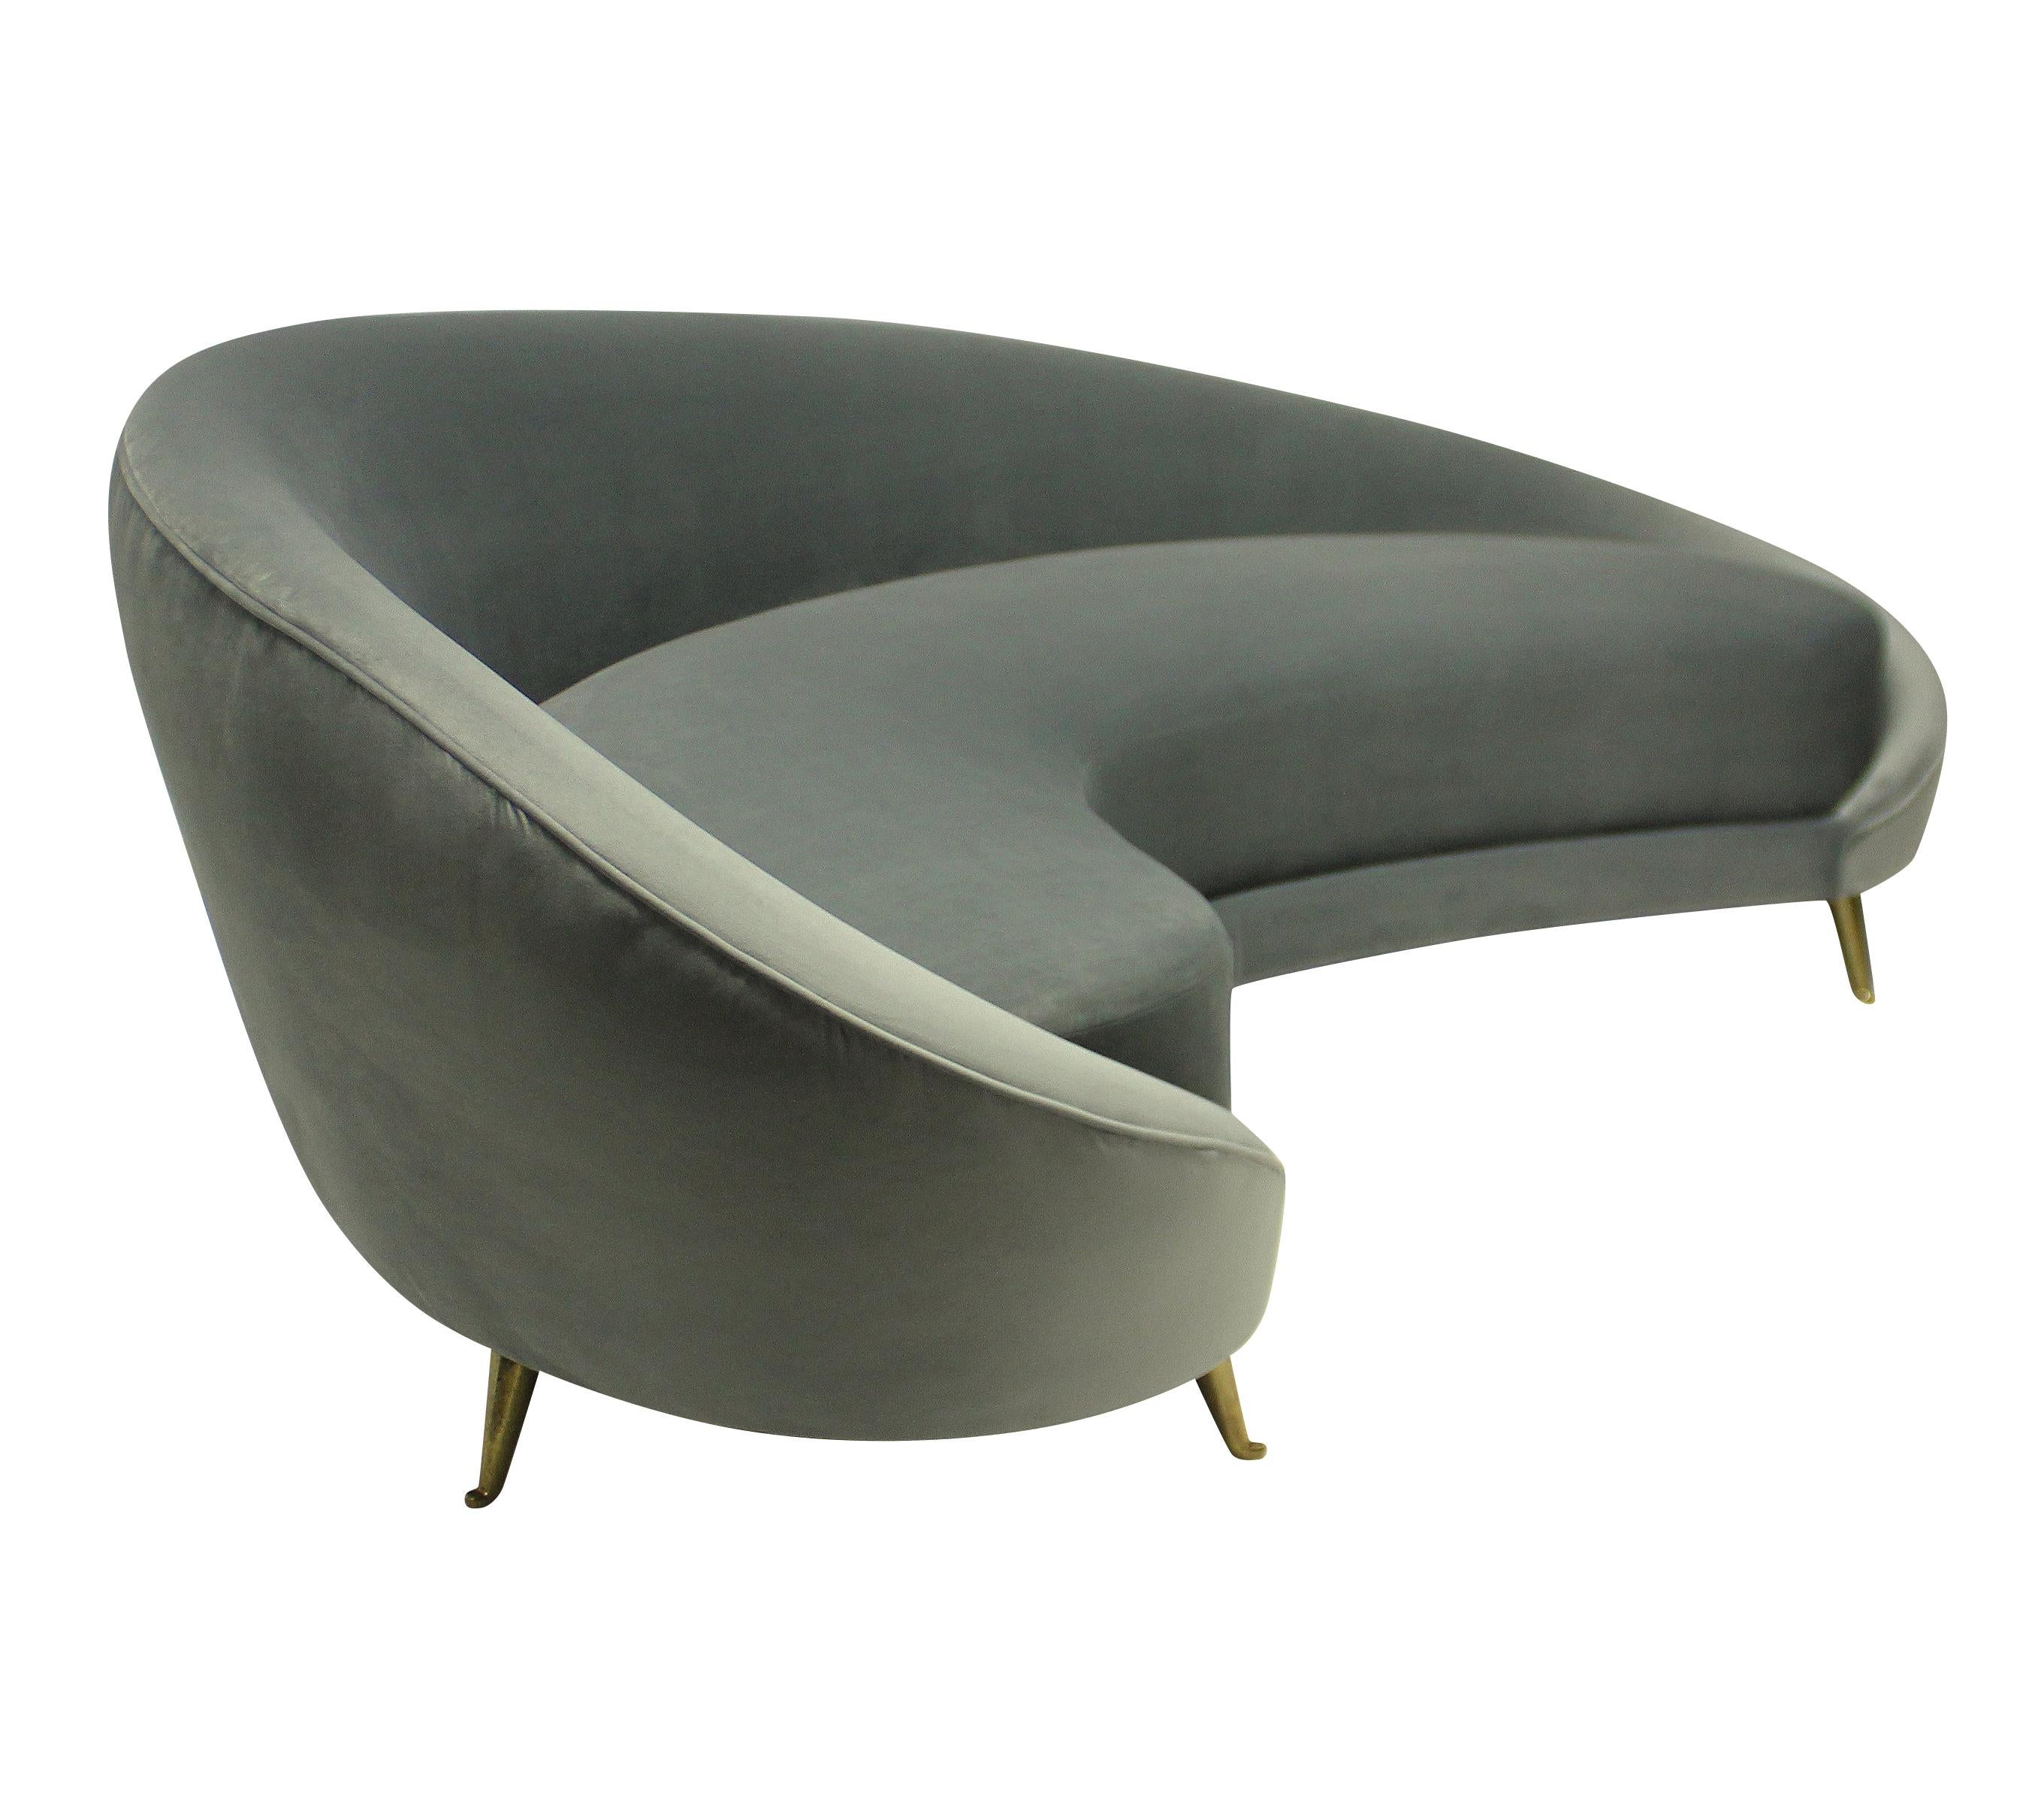 A large Italian curved asymmetrical sofa in the style Ico Parisi, on brass feet by ISA, and newly upholstered in grey silk velvet.